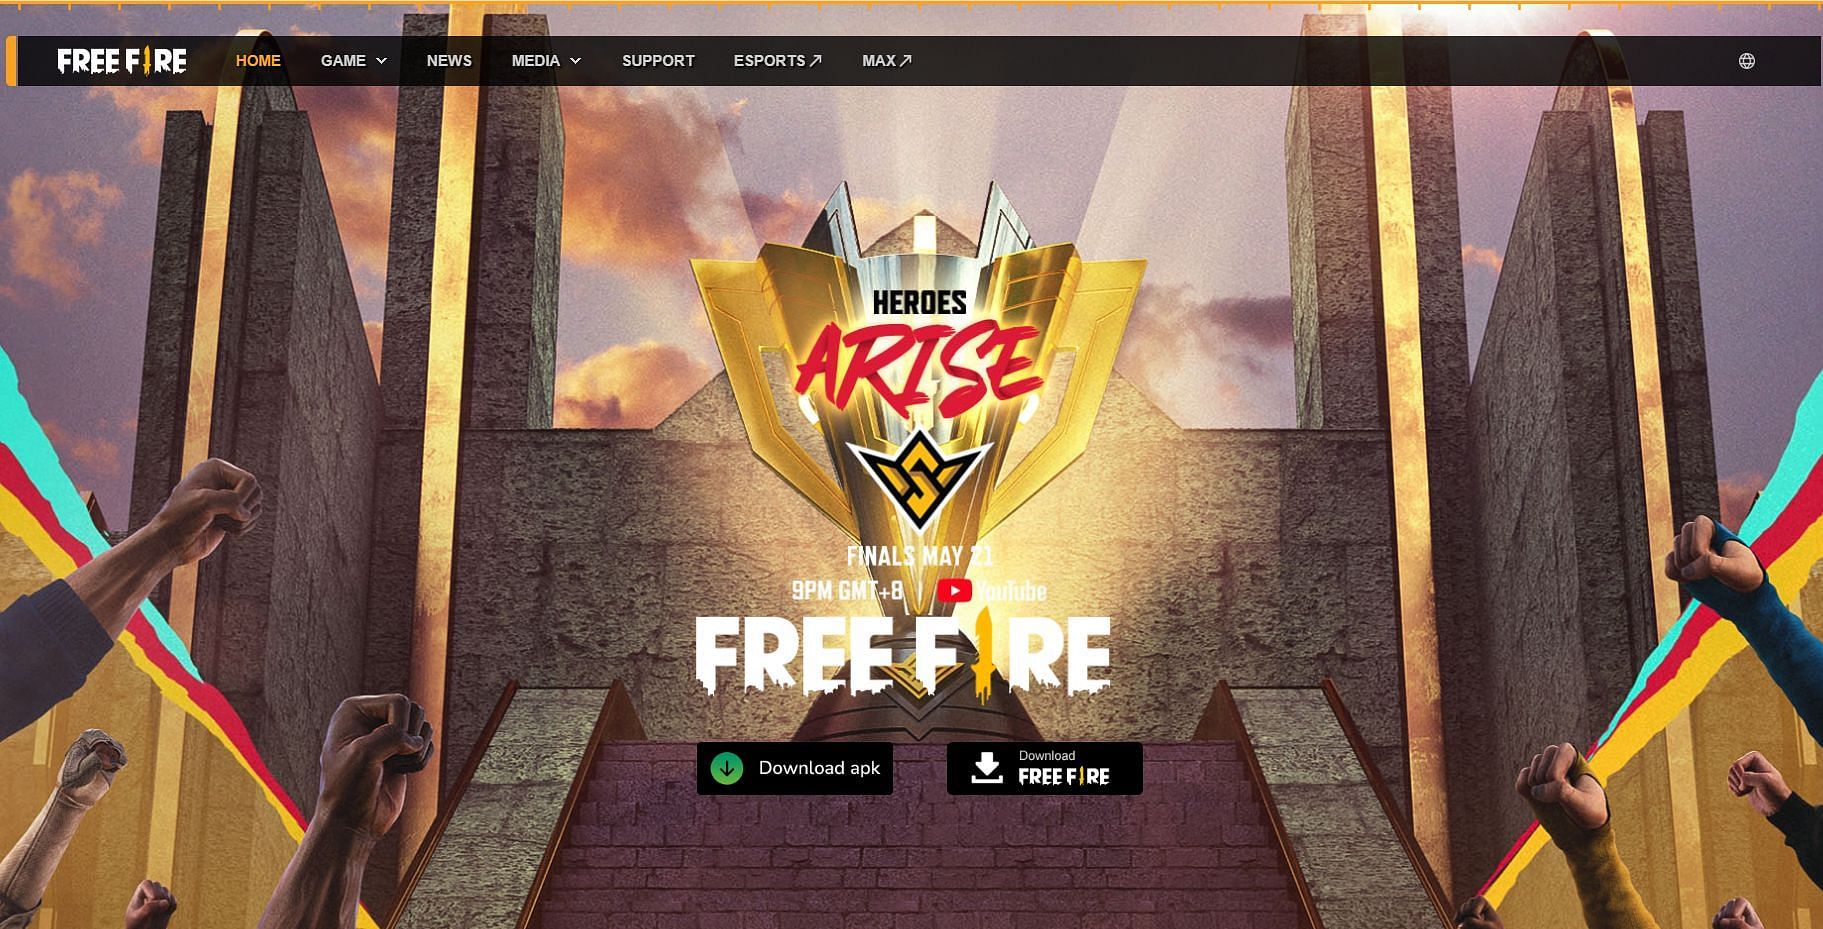 The APK file could be accessible on the website (Image via Garena)